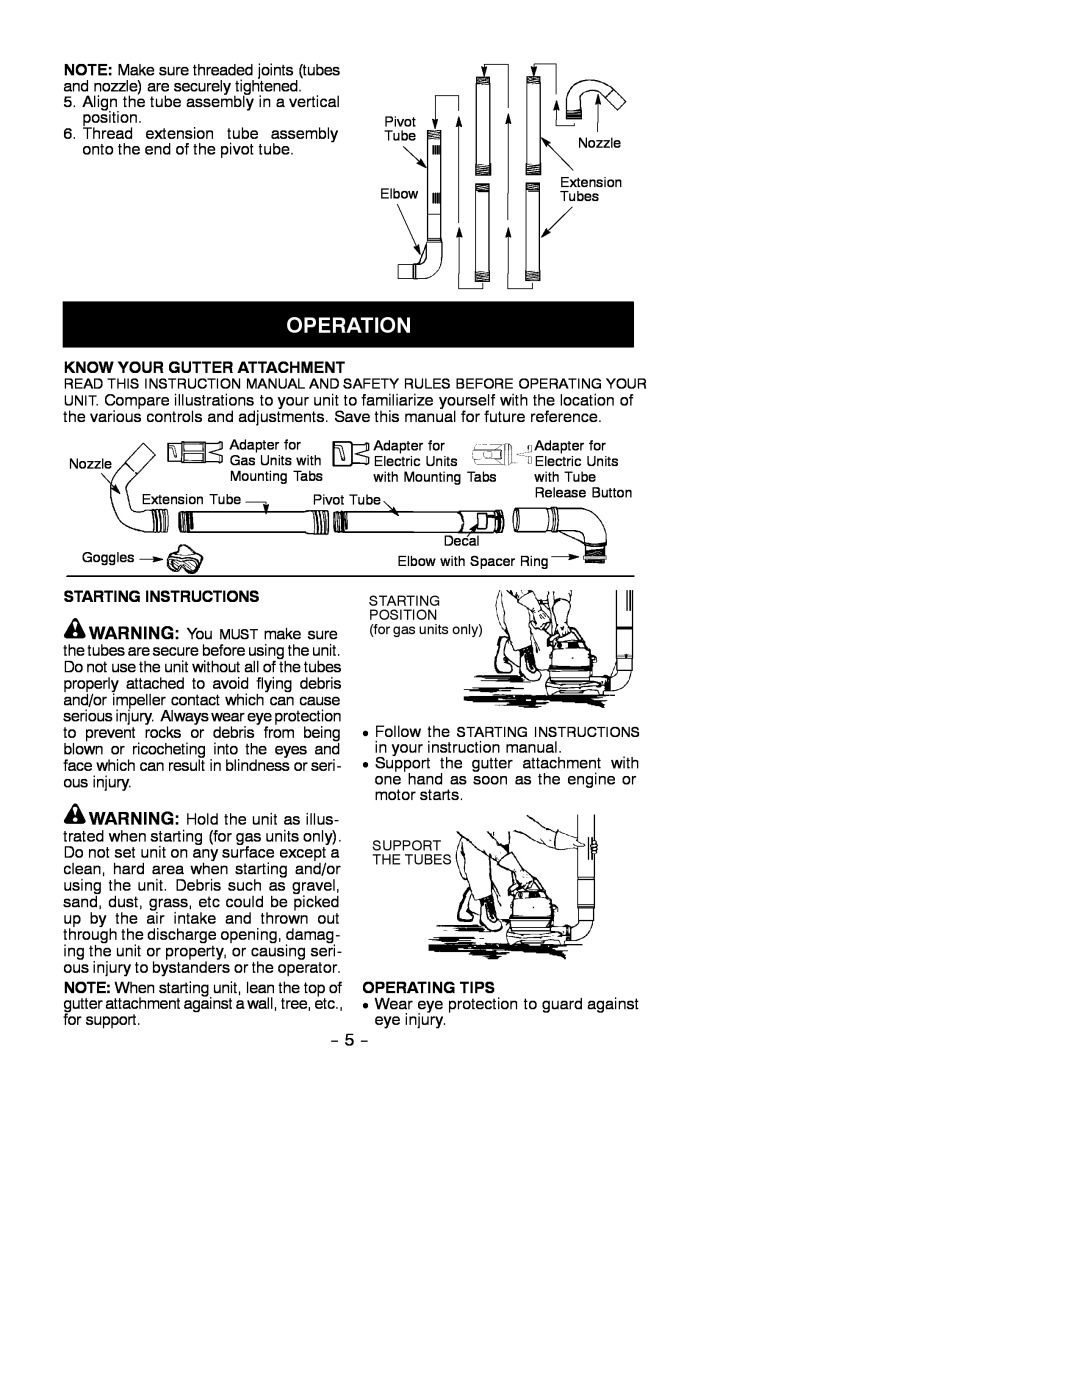 Weed Eater GA2010 instruction manual Know Your Gutter Attachment, Starting Instructions, Operating Tips 